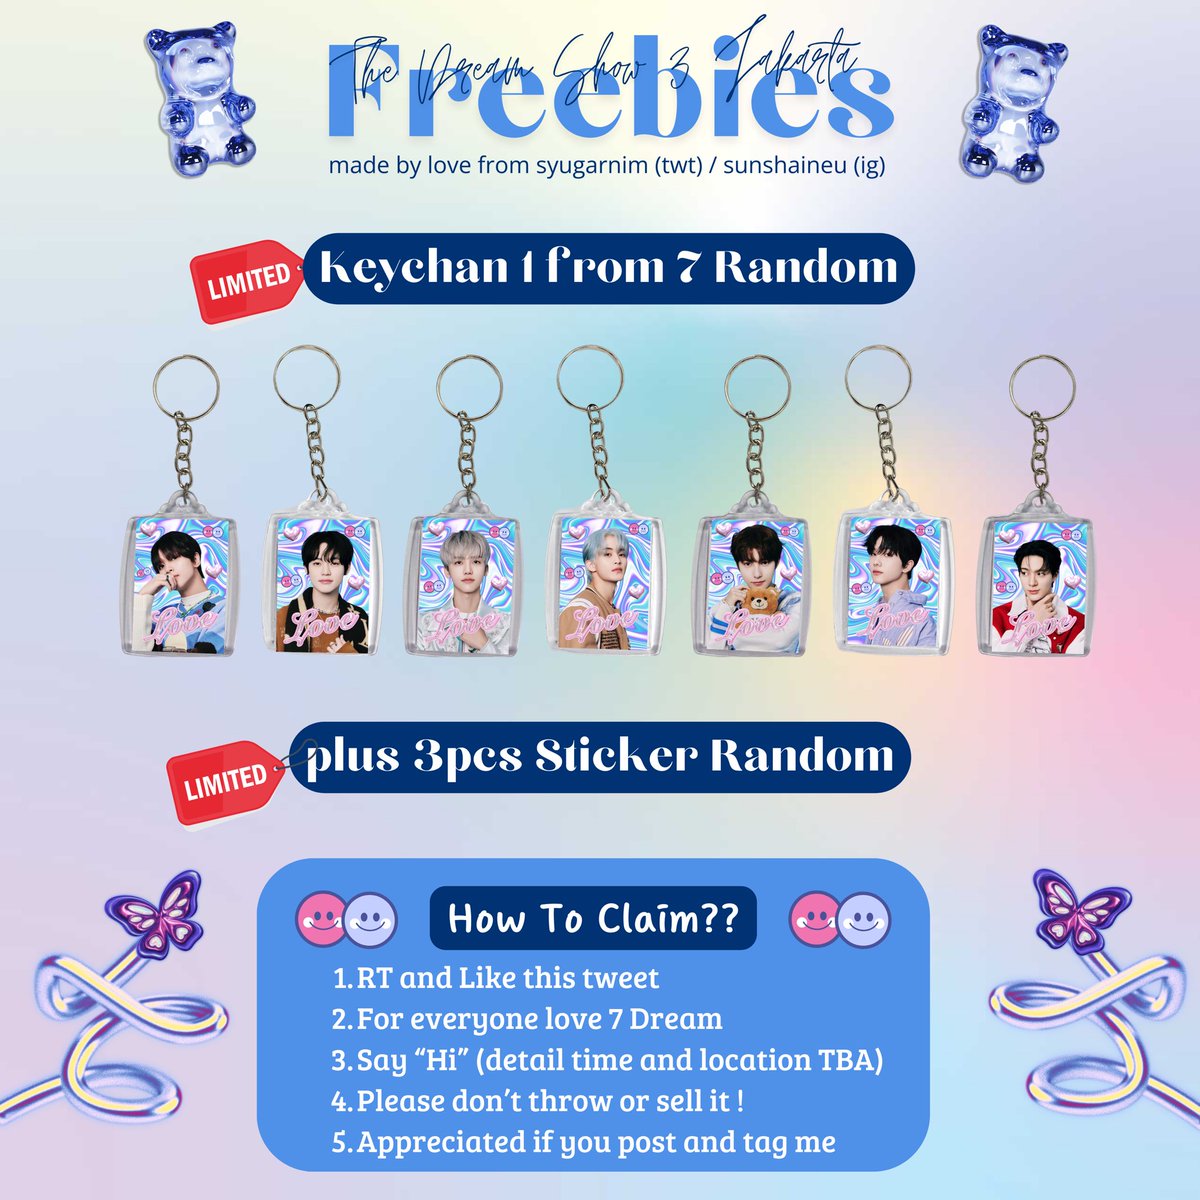 THE DREAM SHOW 3 in JAKARTA
Freebies by @syugarnim 

🗓️ Sat, 18 May 2024 
📍 GBK Stadium
⏰ TBA
⚠️ Limited Quantity

Hope you like the freebies & See you at the venue! 🤗

#THEDREAMSHOW3INJKT 
#NCTDREAM_THEDREAMSHOW3_JAKARTA #TDS3INJAKARTA #TDS3INJKT